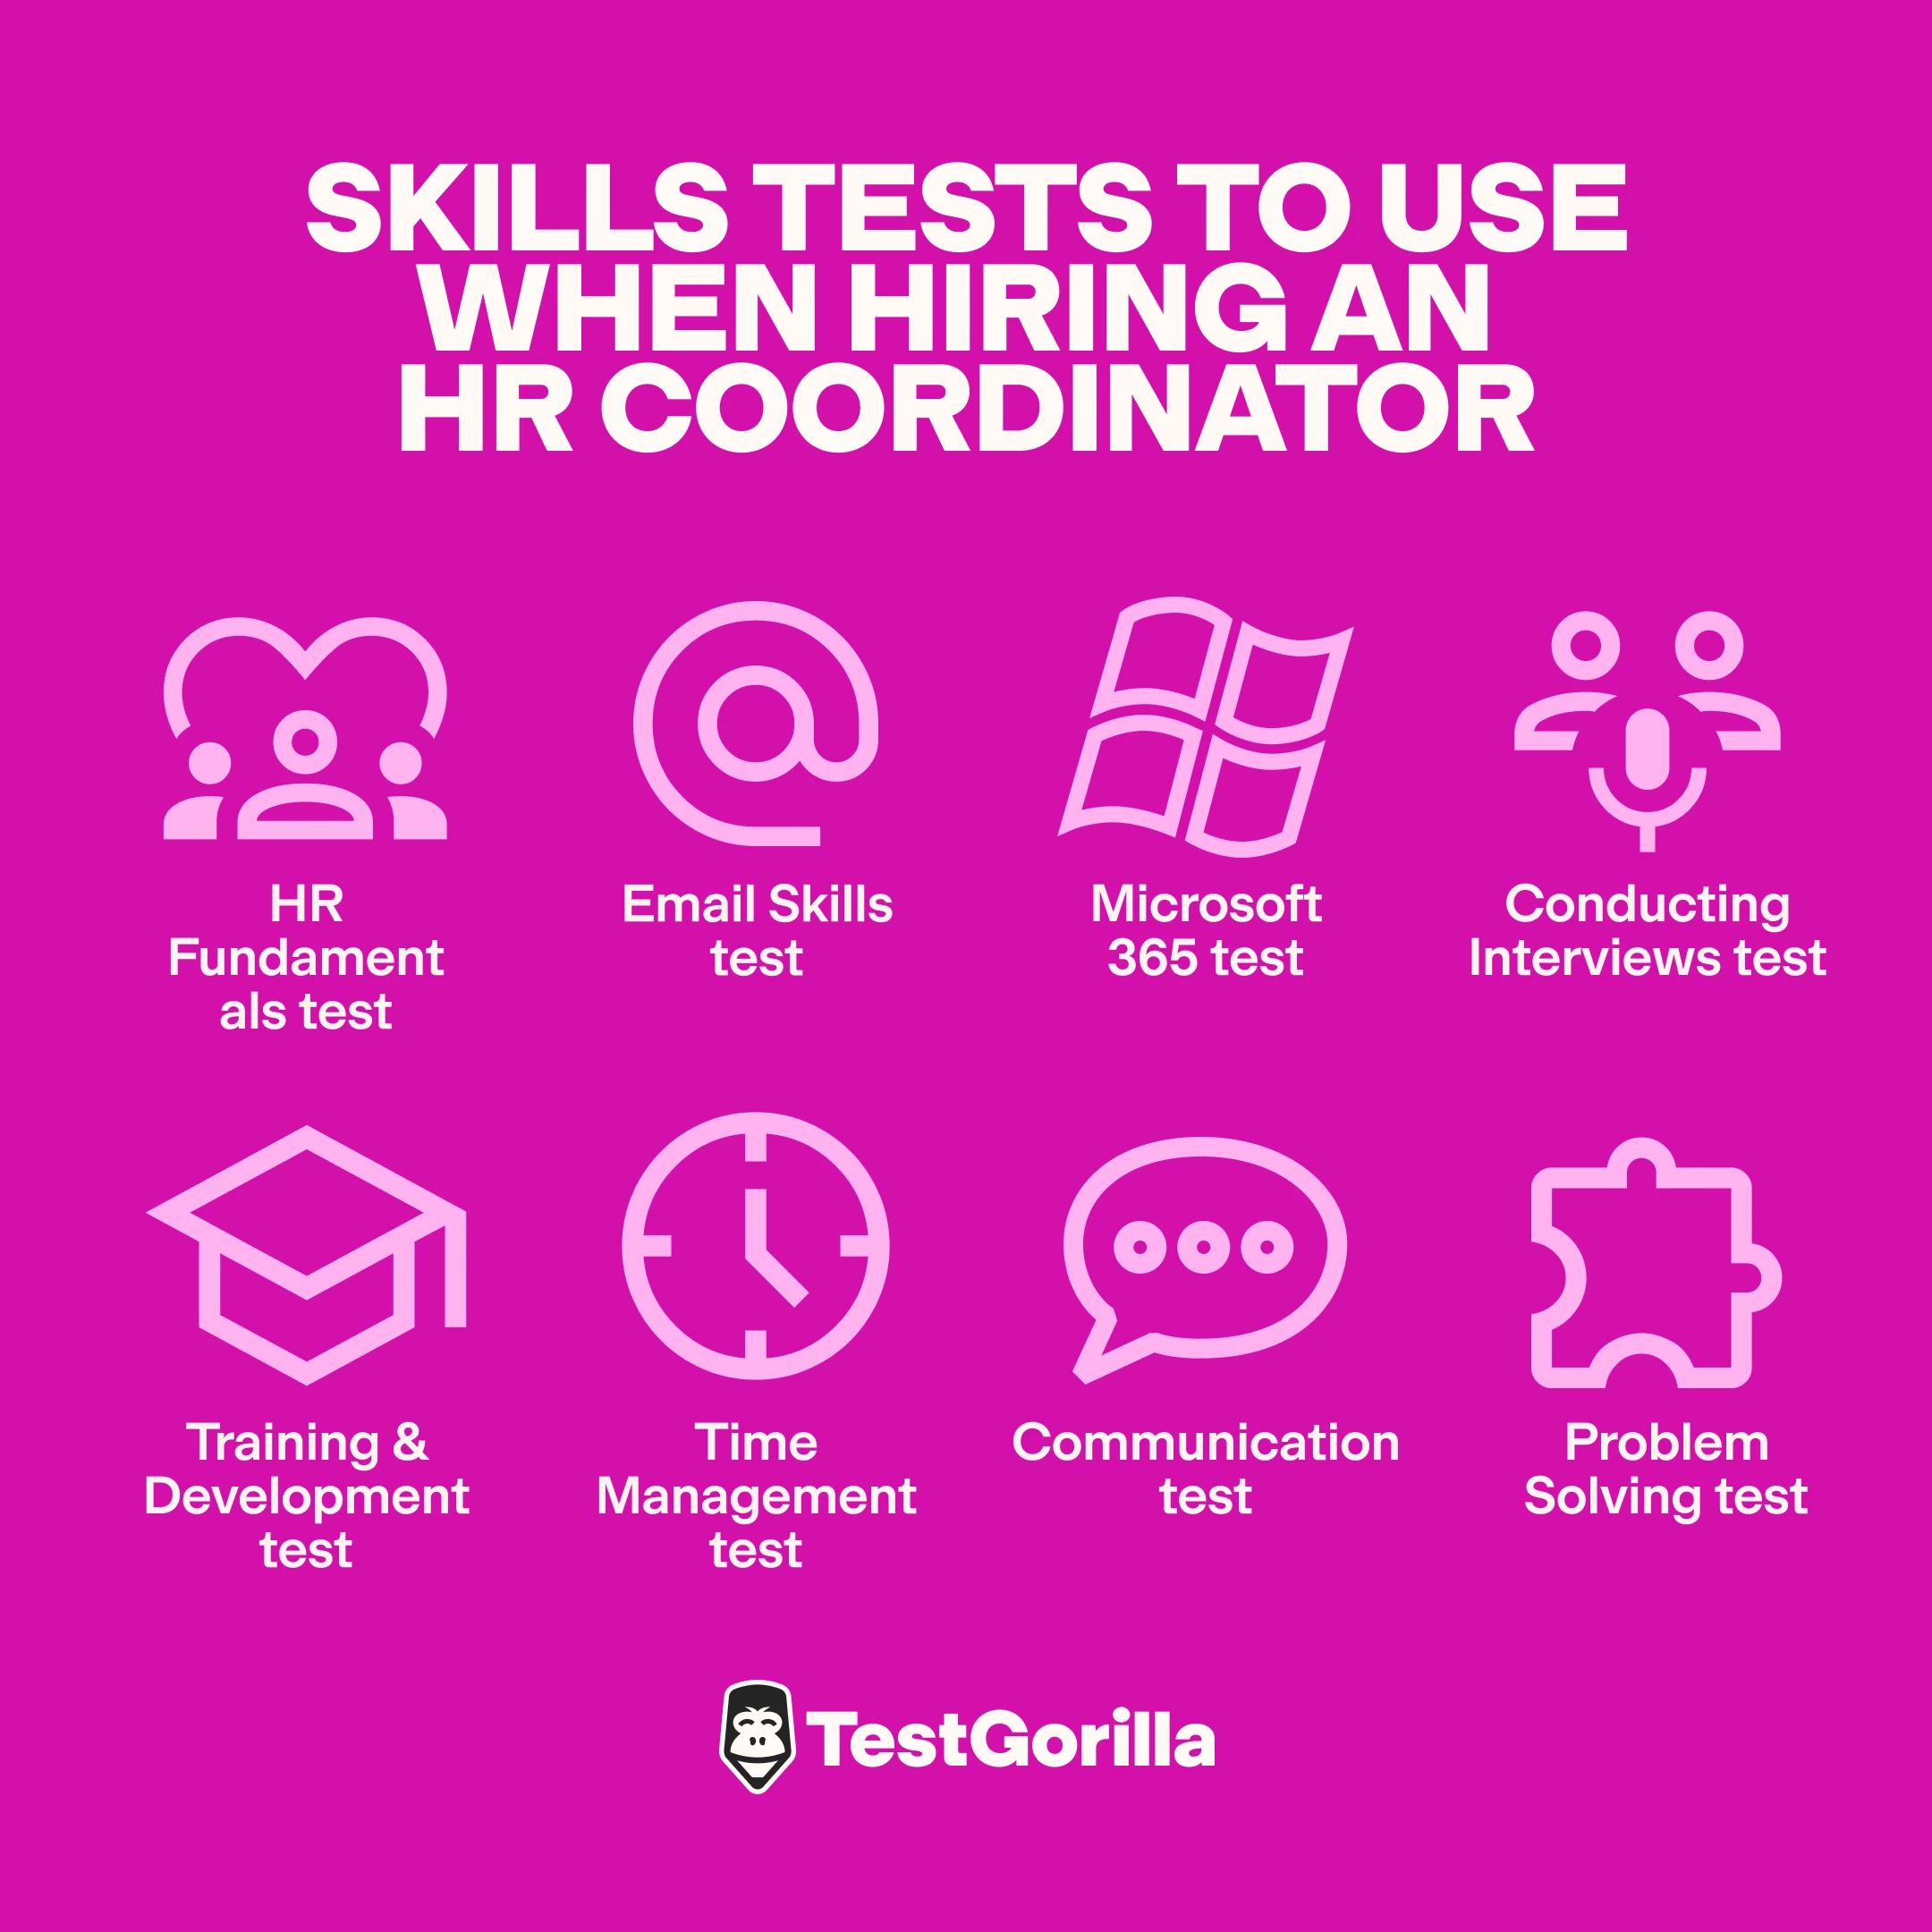 Skills-tests-to-use-when-hiring-an-HR-coordinator